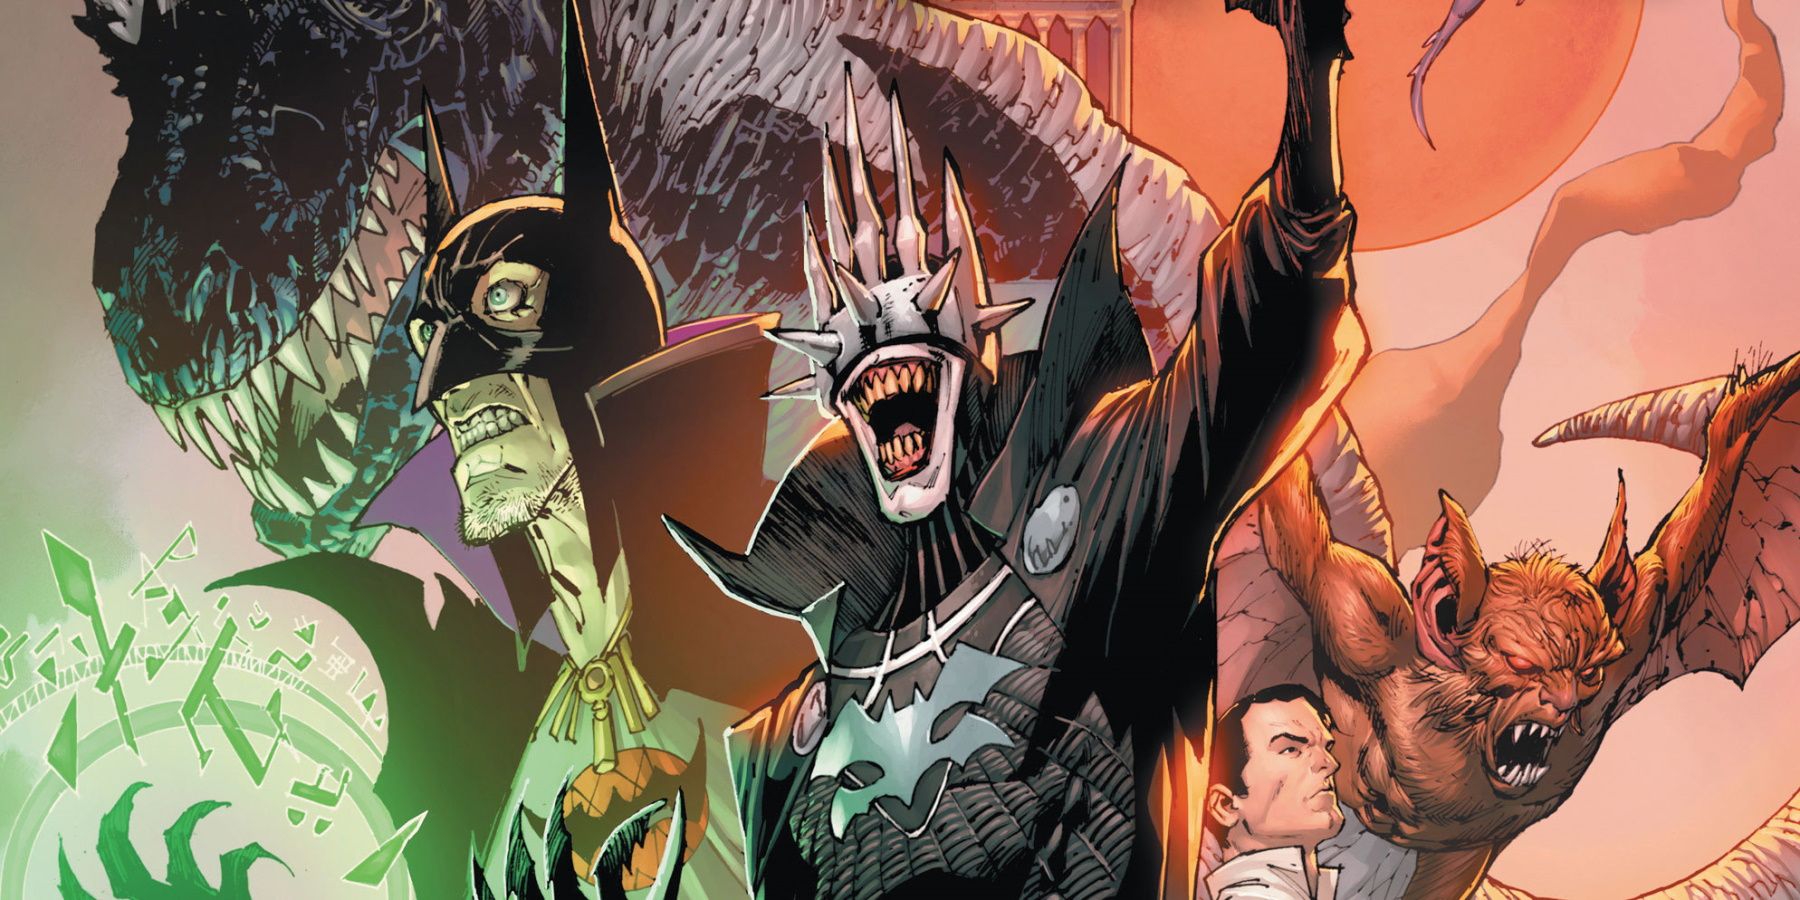 The Batman Who Laughs readying to attack.